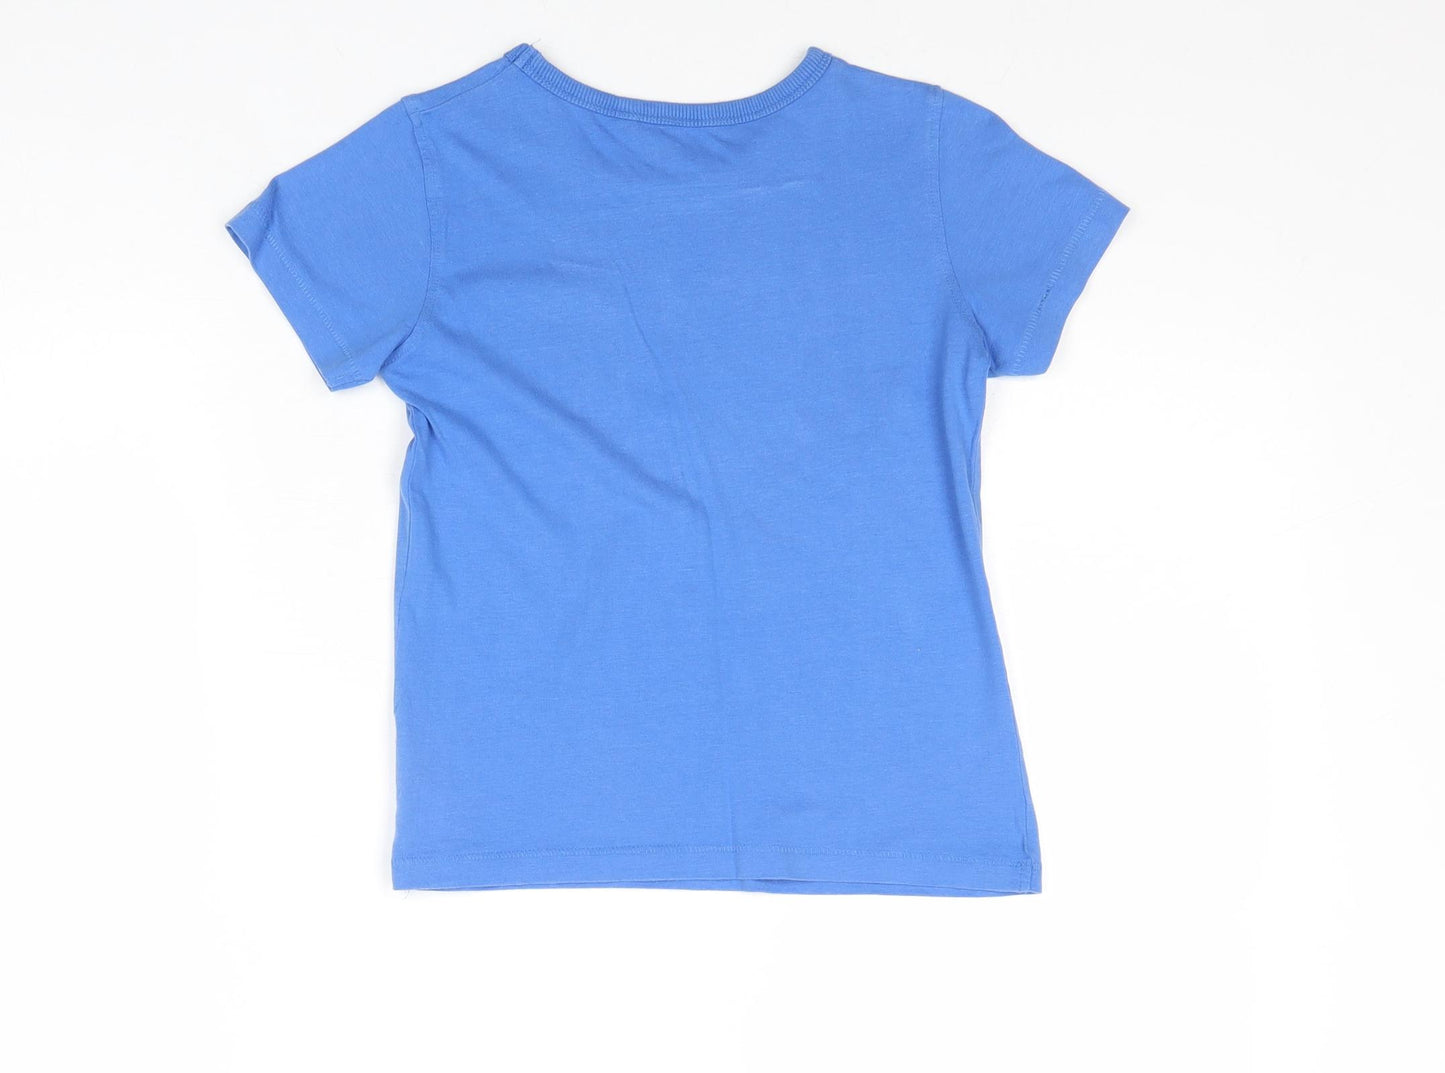 NEXT Boys Blue Cotton Basic T-Shirt Size 5-6 Years Round Neck Pullover